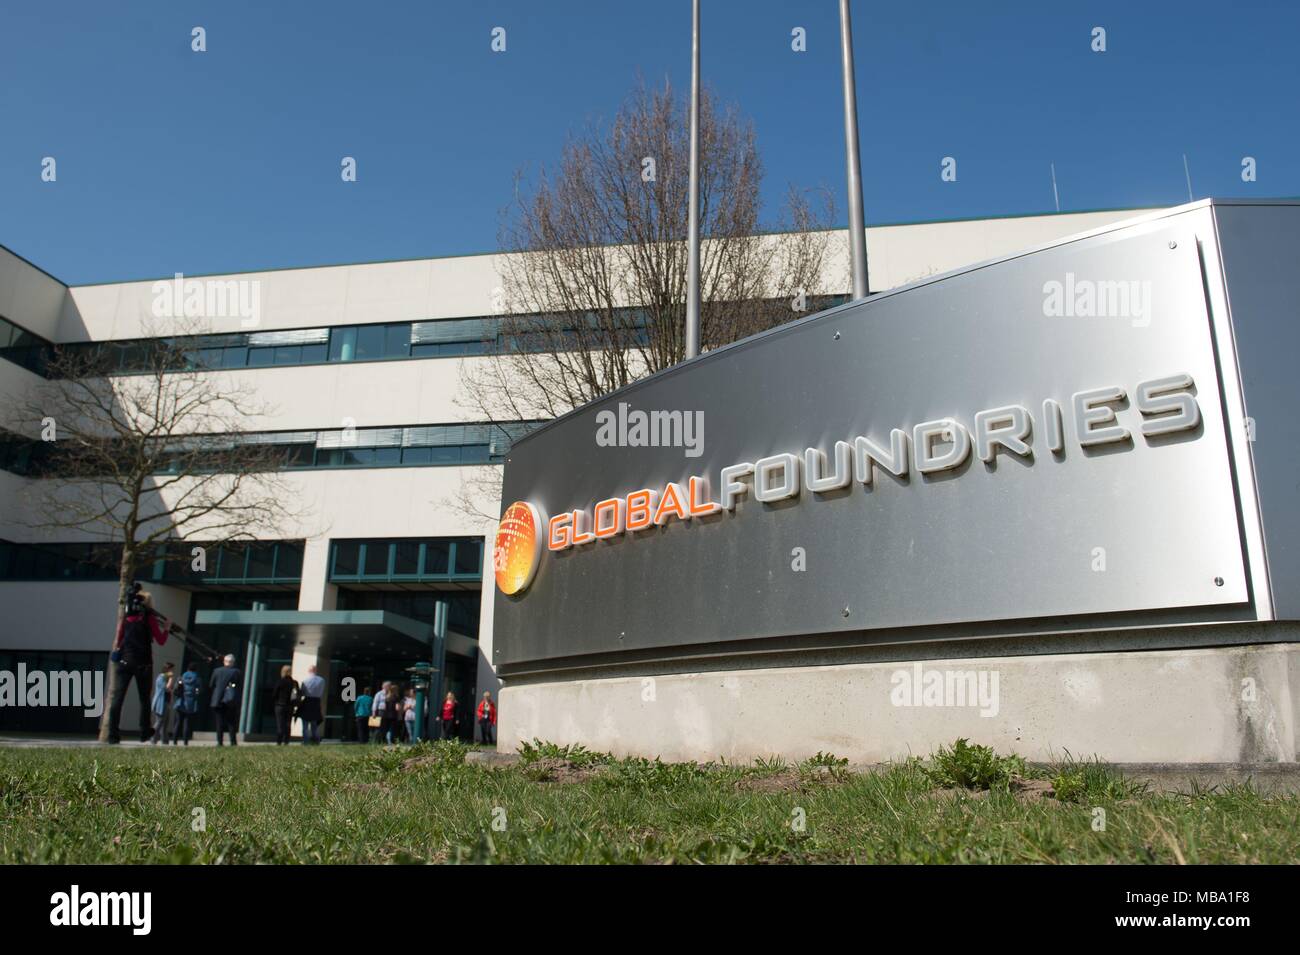 09 April 2018, Germany, Dresden: View of a manufacturing facility of Globalfoundries (GF). The company is giving a press conference on the development of techonology for the car industry. Photo: Sebastian Kahnert/dpa-Zentralbild/dpa Stock Photo